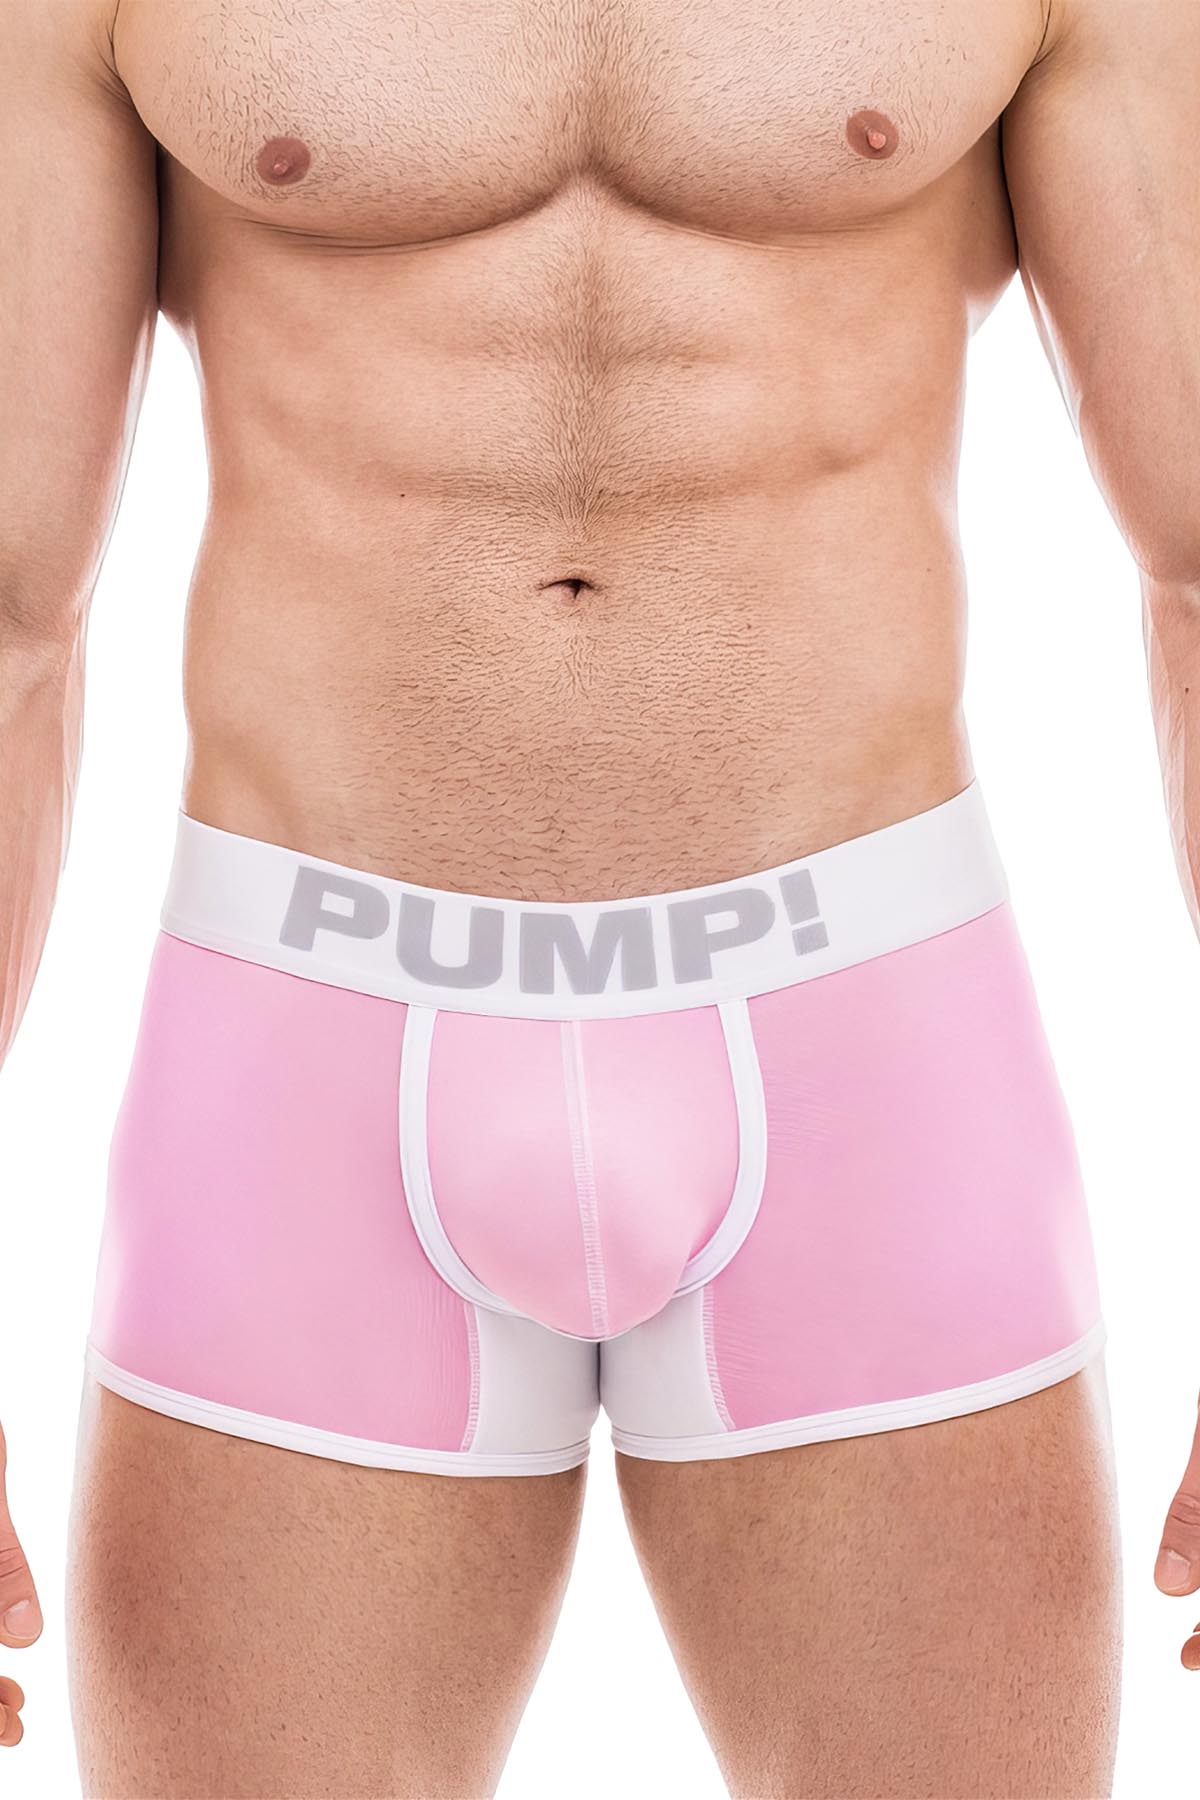 Only elasticated waist boxer shorts in bubblegum pink